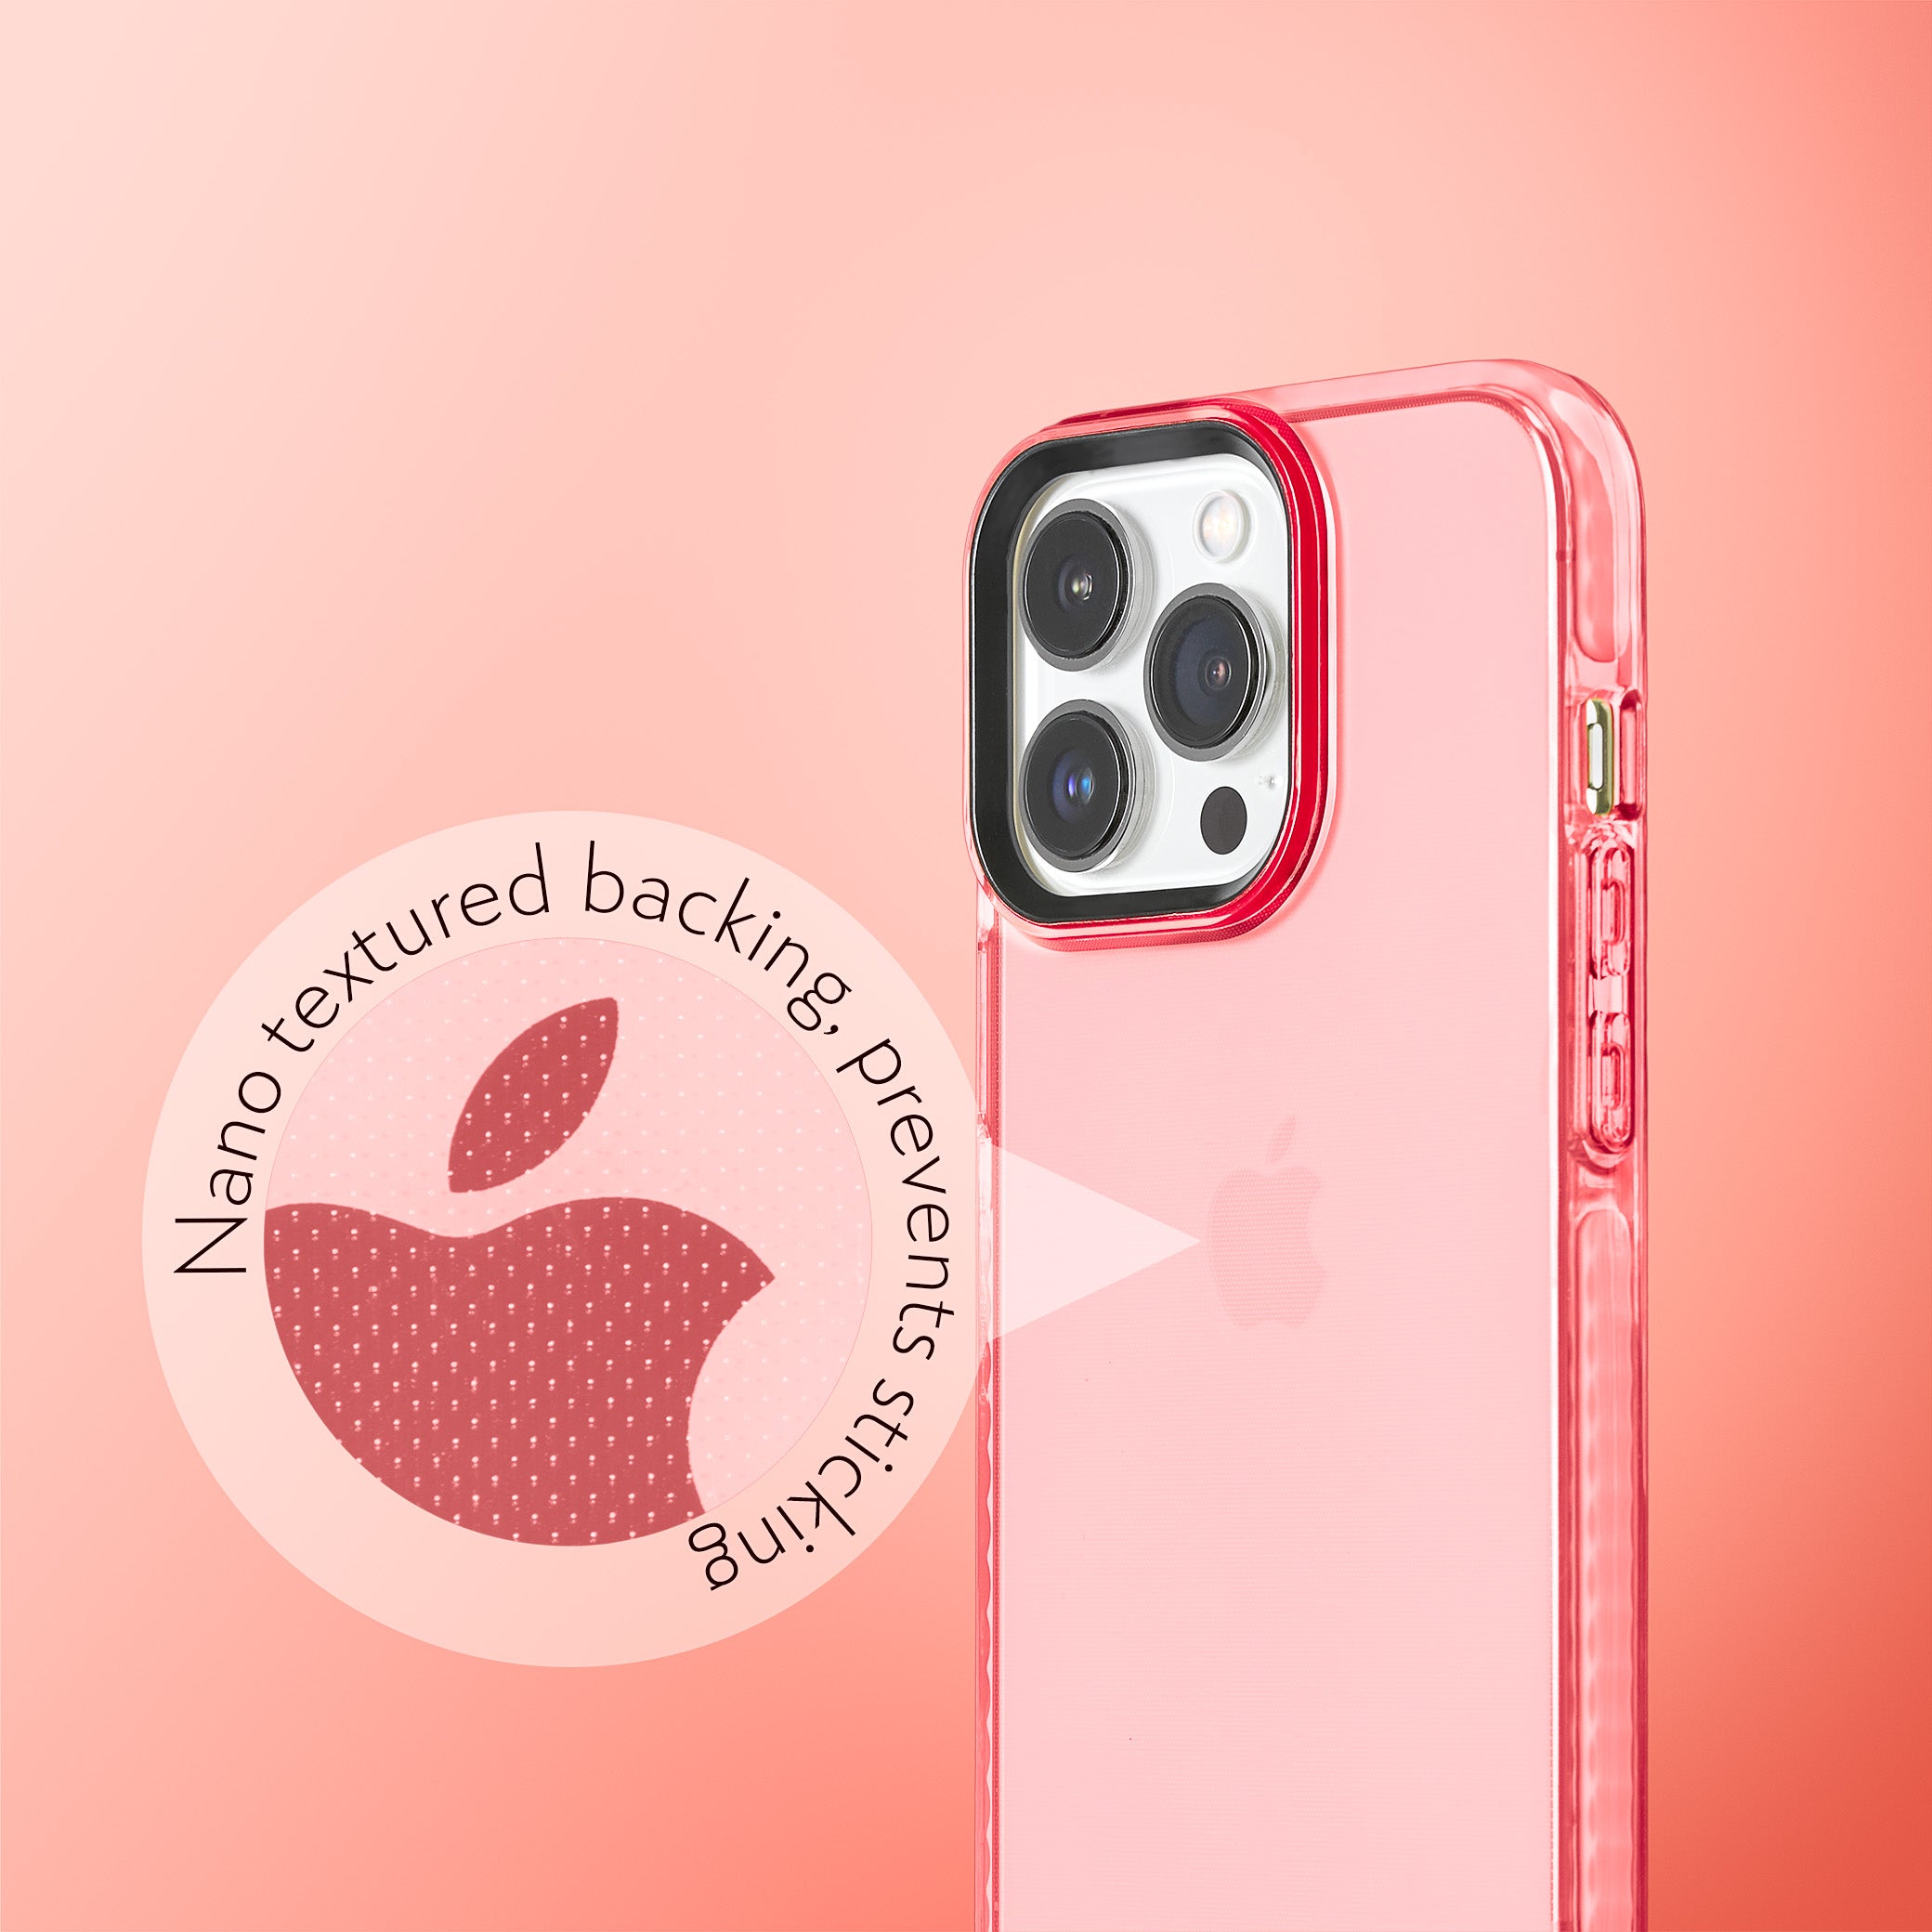 Barrier Case for iPhone 13 Pro - Subtle Pink Peach